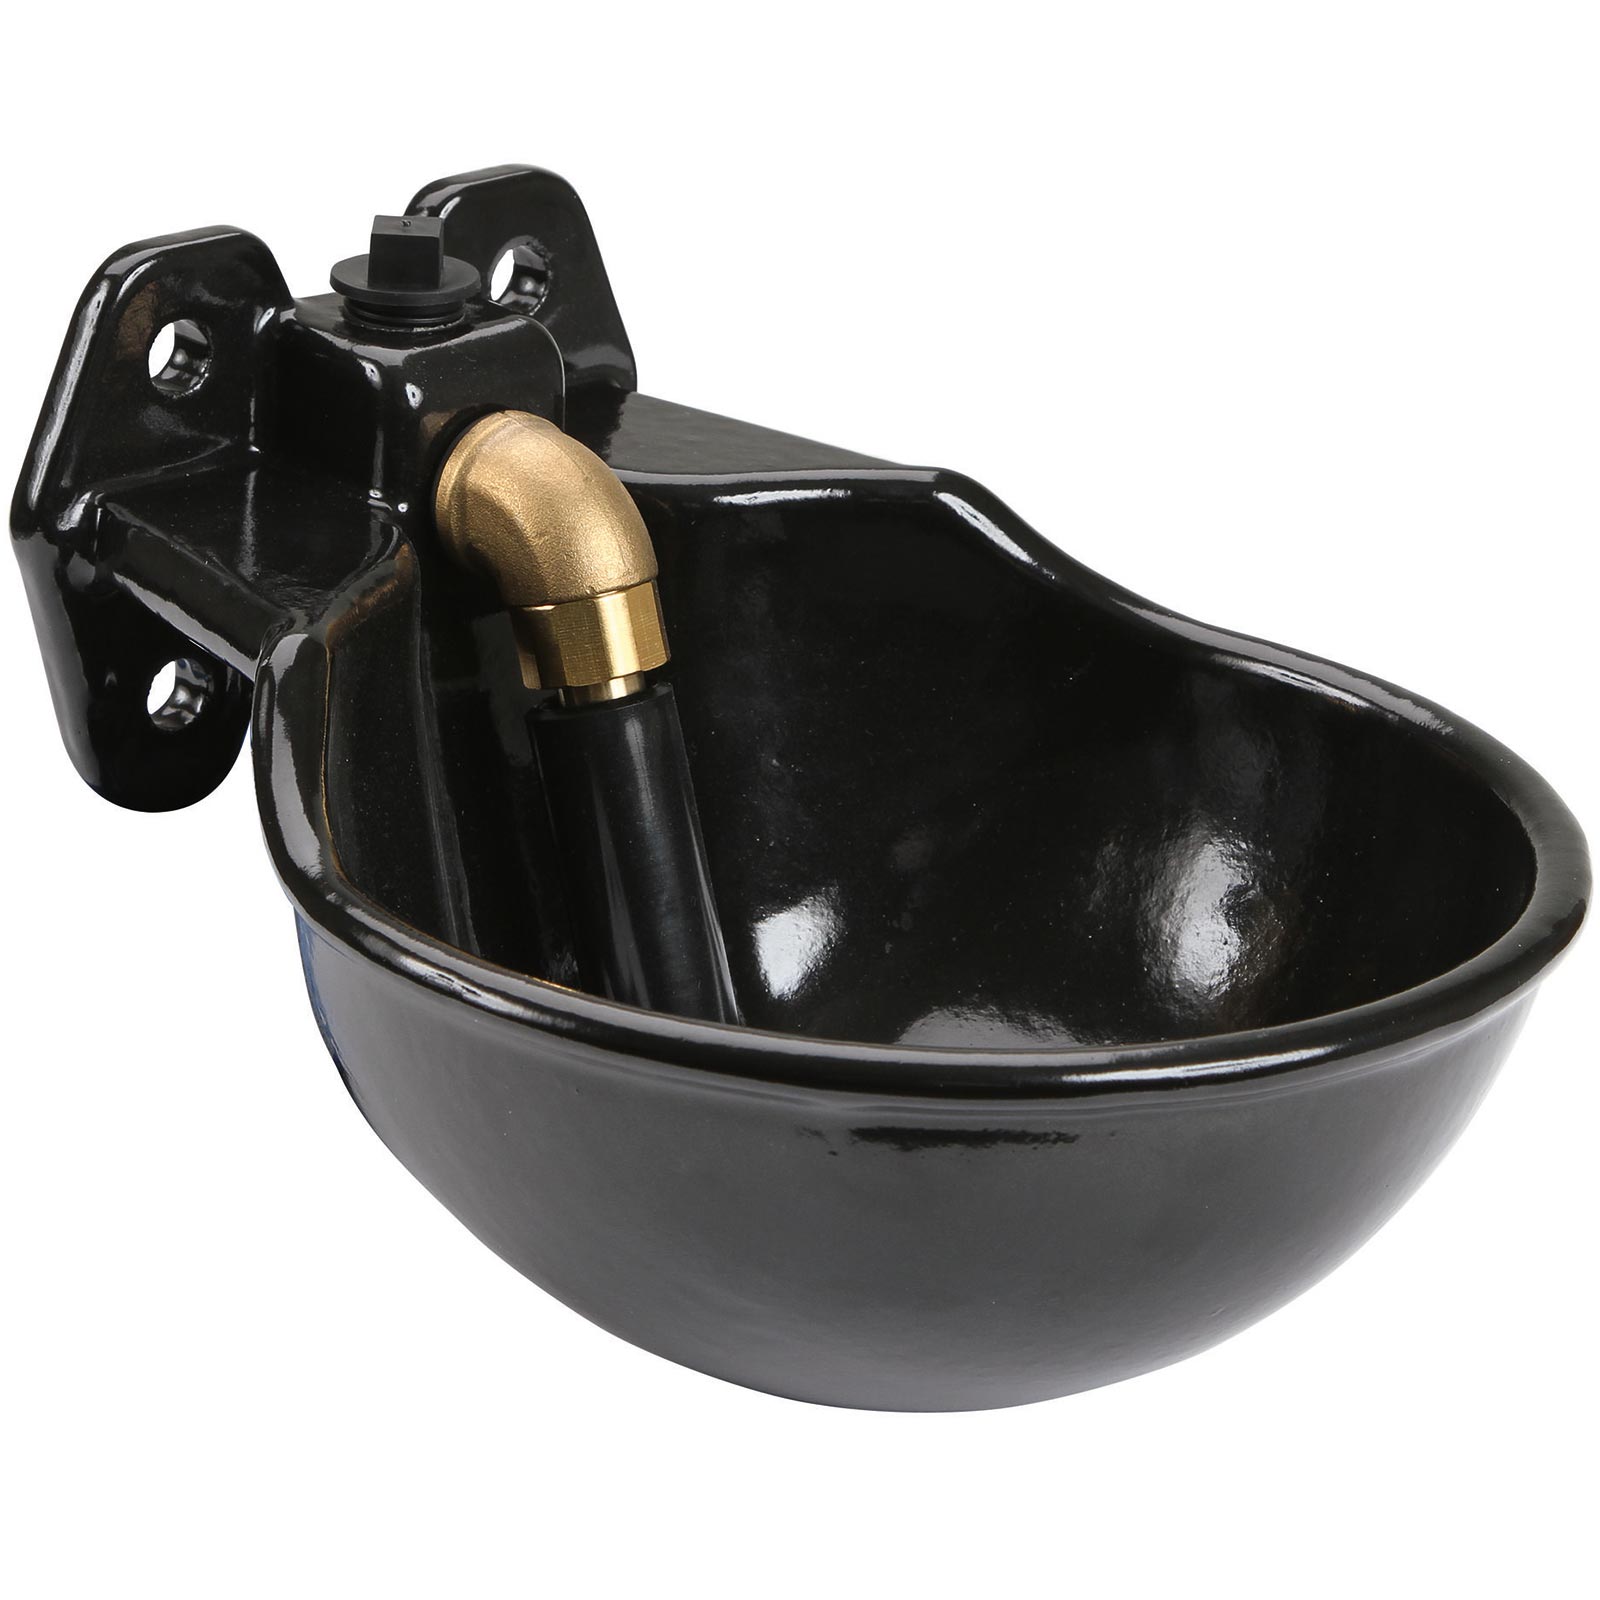 Water bowl G51 with tube valve enameled